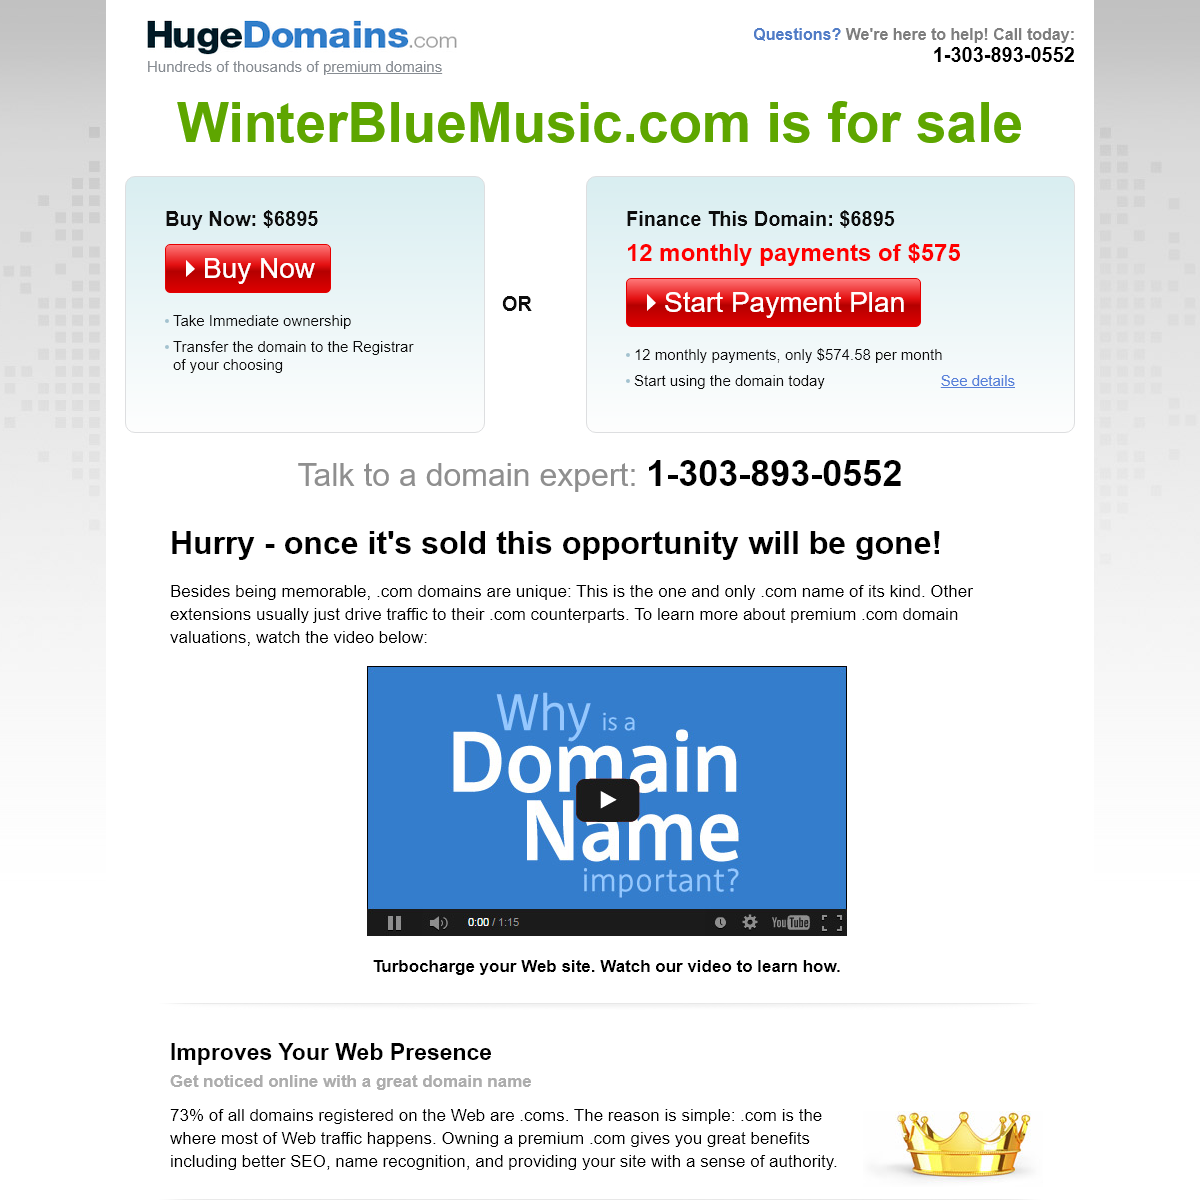 HugeDomains.com - WinterBlueMusic.com is for sale (Winter Blue Music)